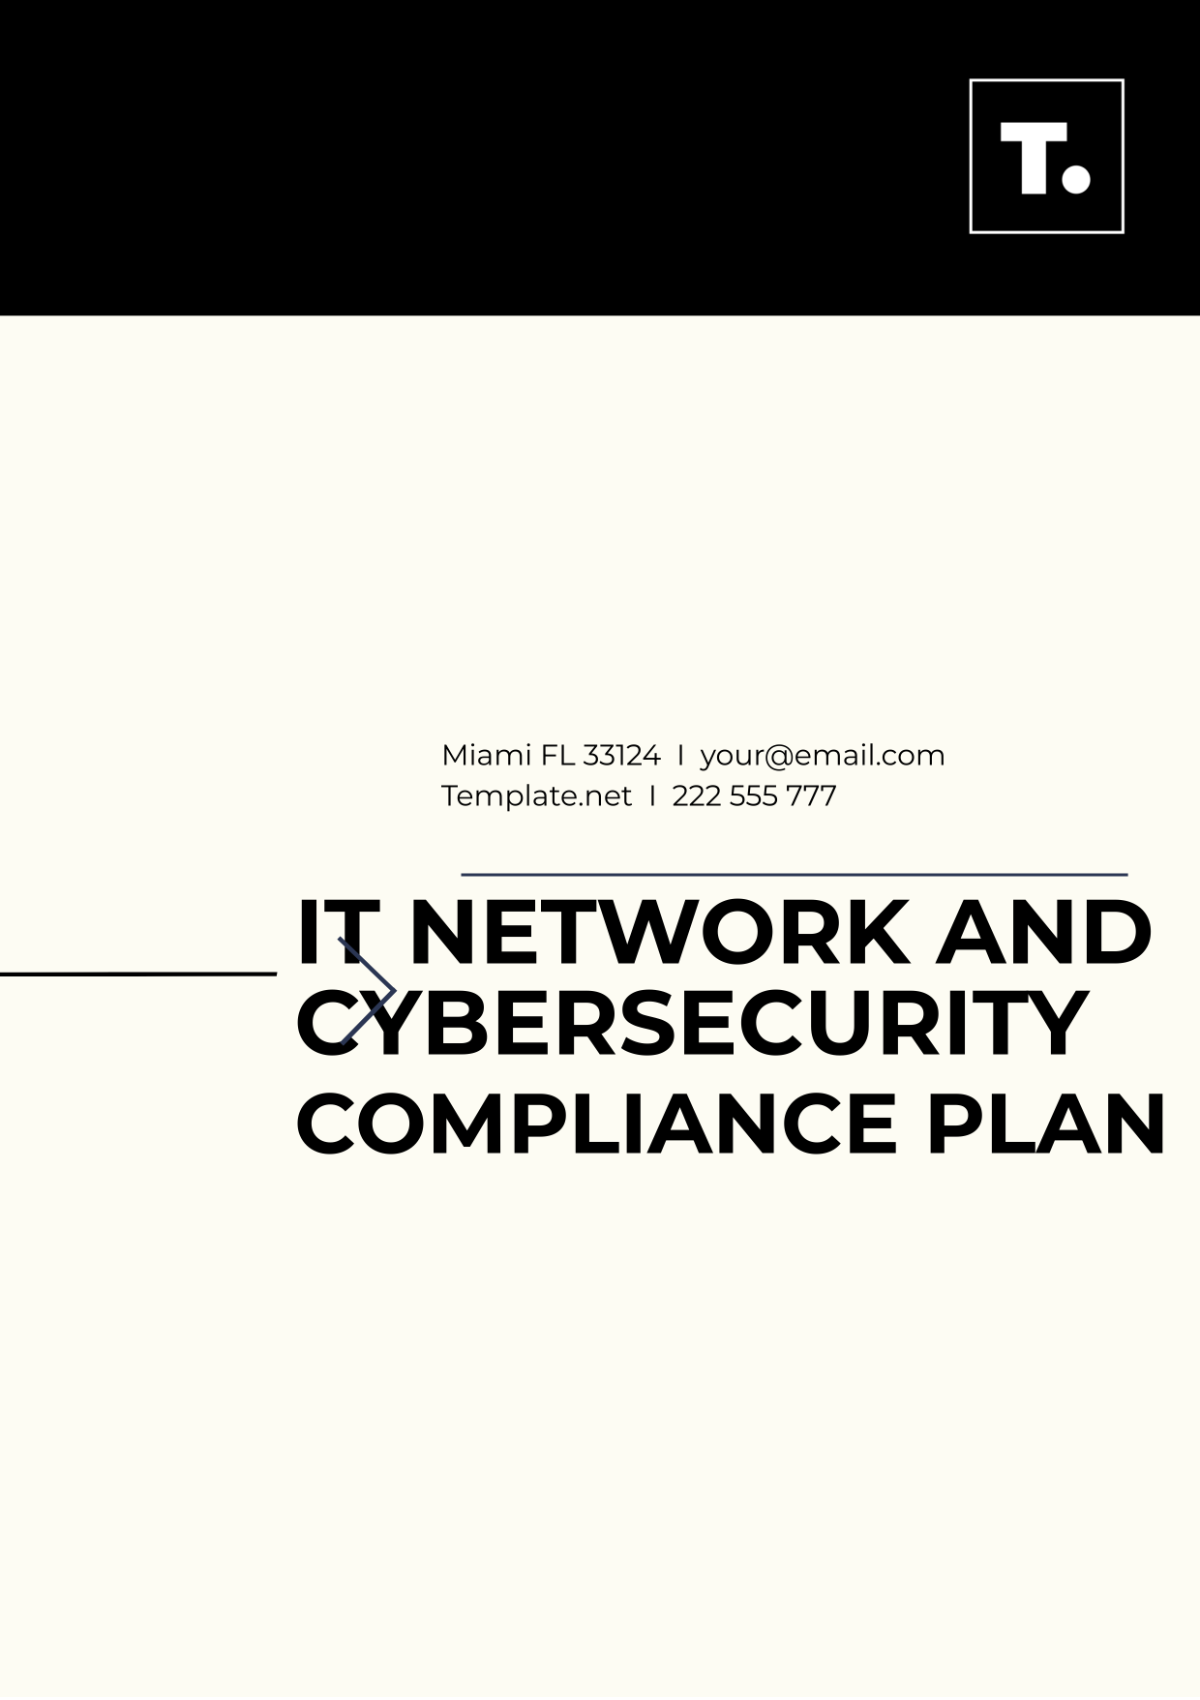 IT Network And Cybersecurity Compliance Plan Template